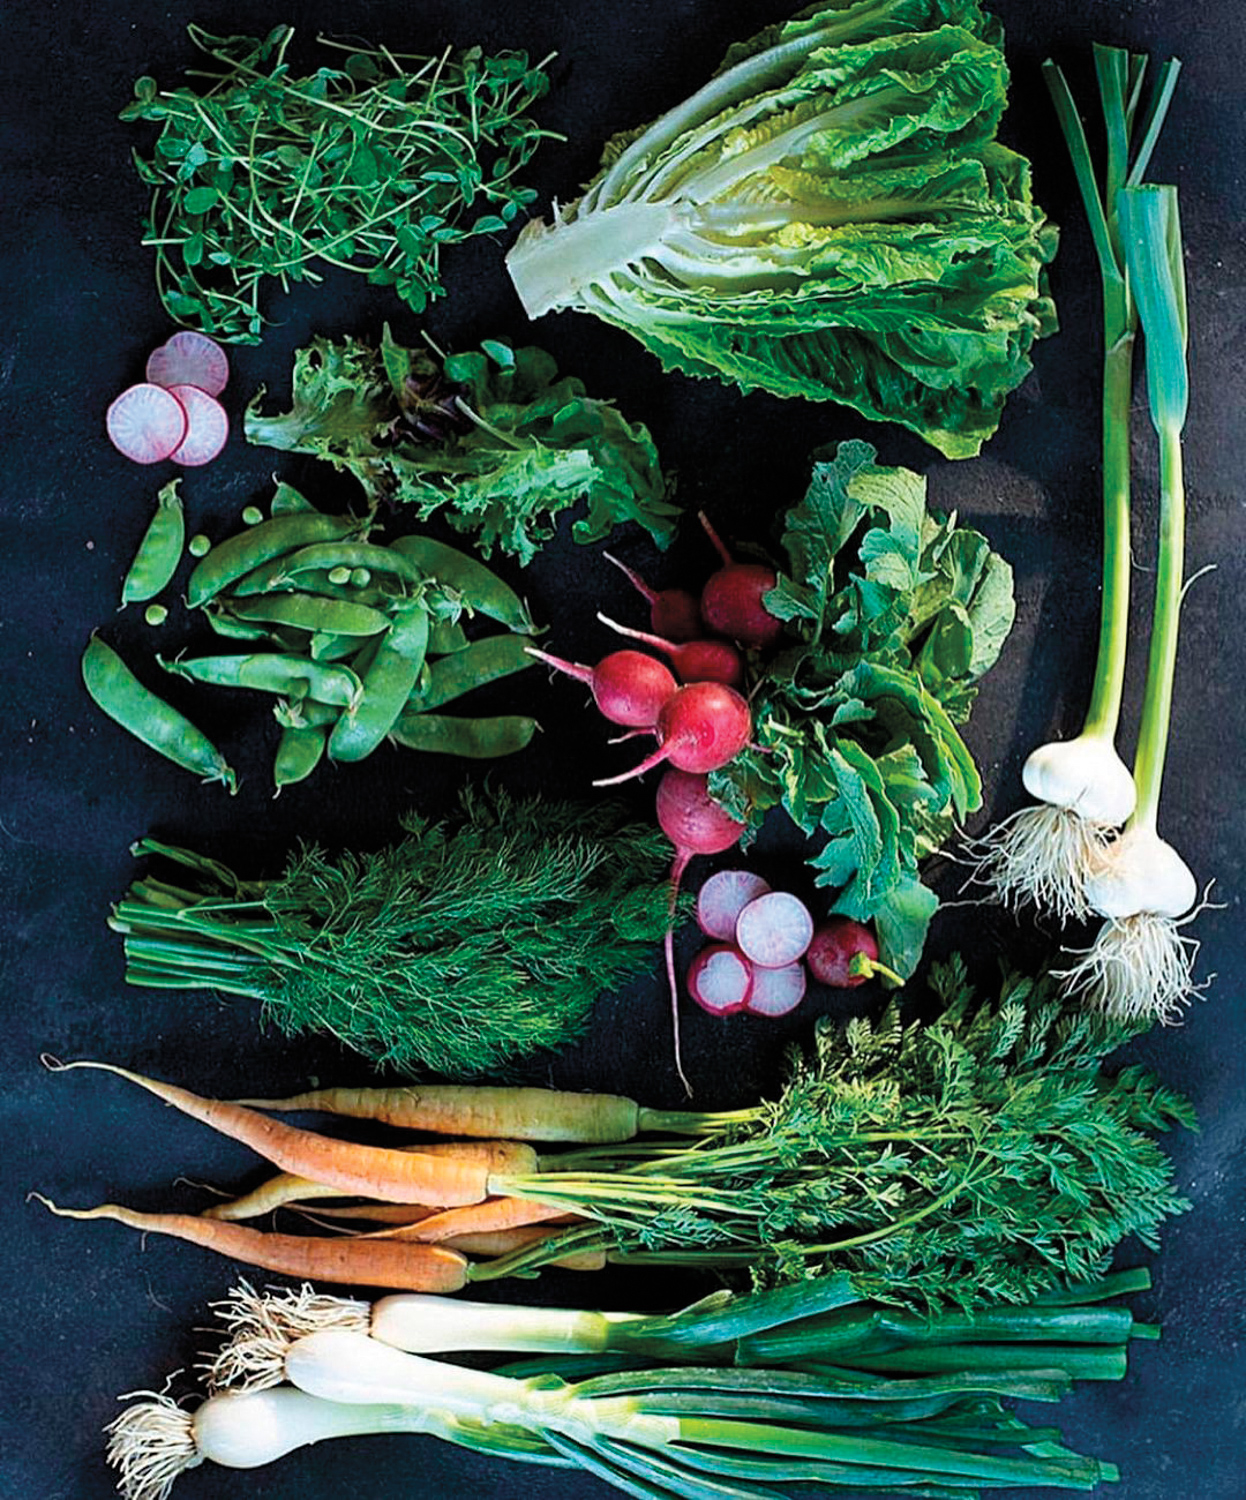 Bunches of carrots, leeks, radishes, peas, lettuce and other vegetables at Whipstone Farm